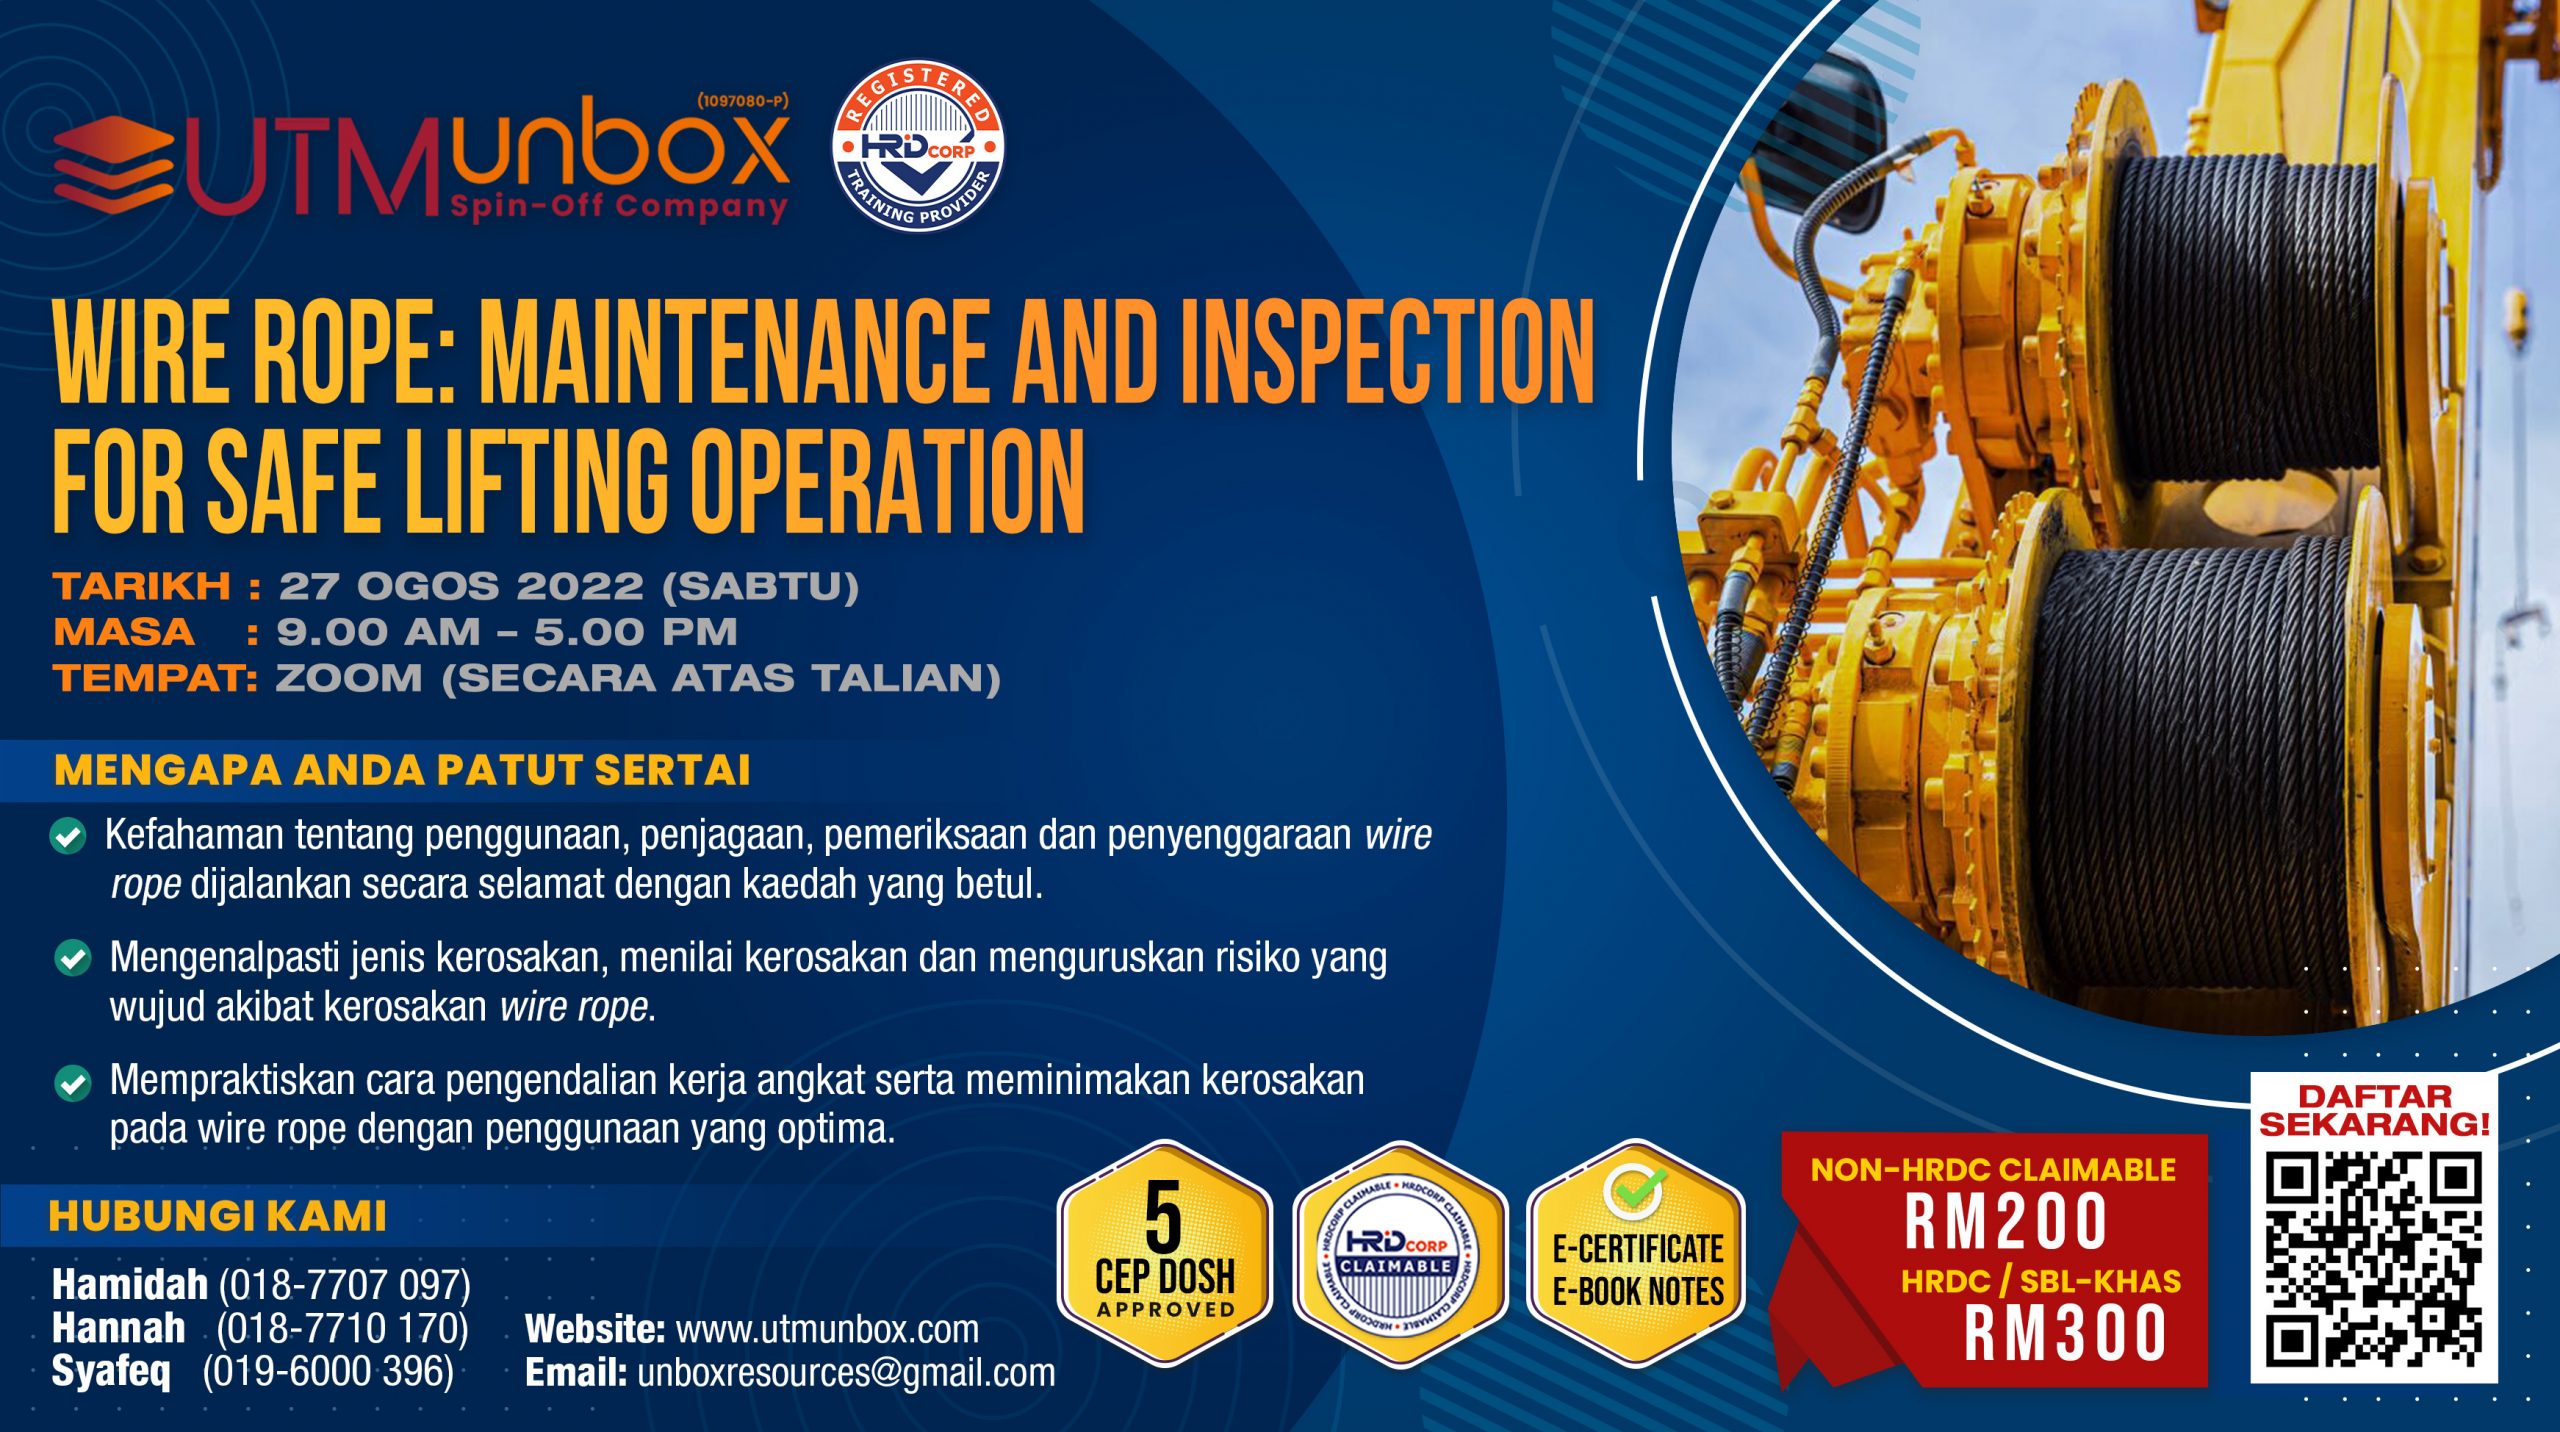 You are currently viewing WIRE ROPE: MAINTENANCE AND INSPECTION FOR SAFE LIFTING OPERATION